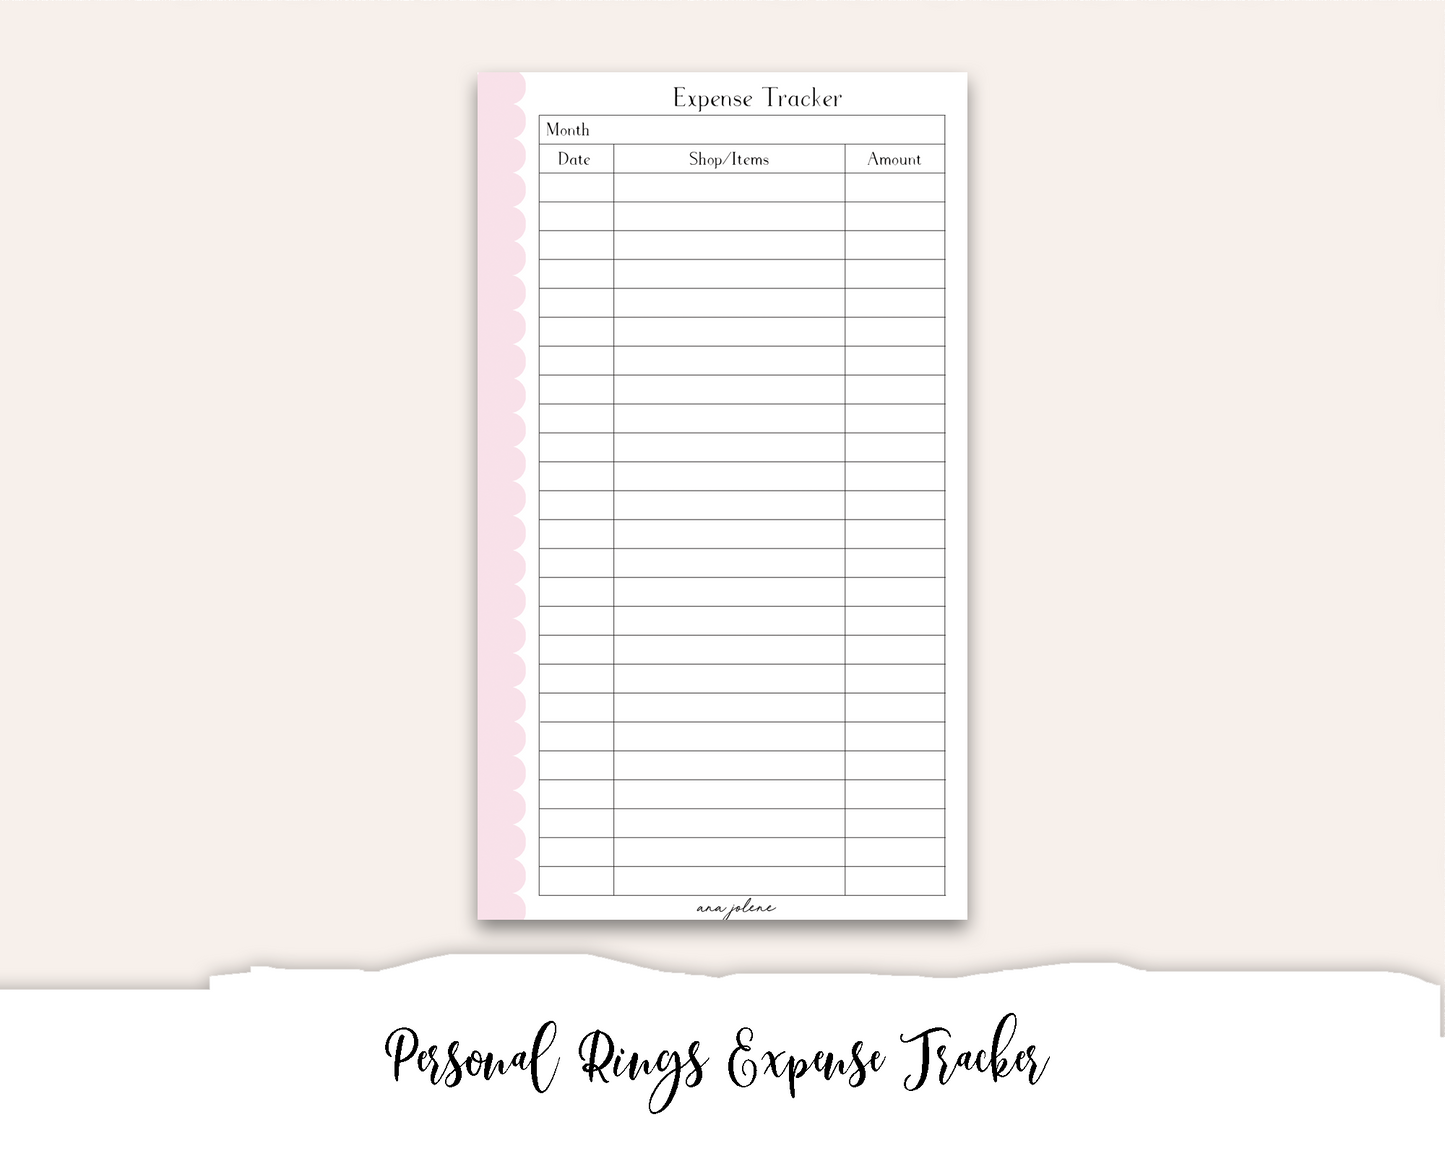 Personal Rings Expense Tracker Printable